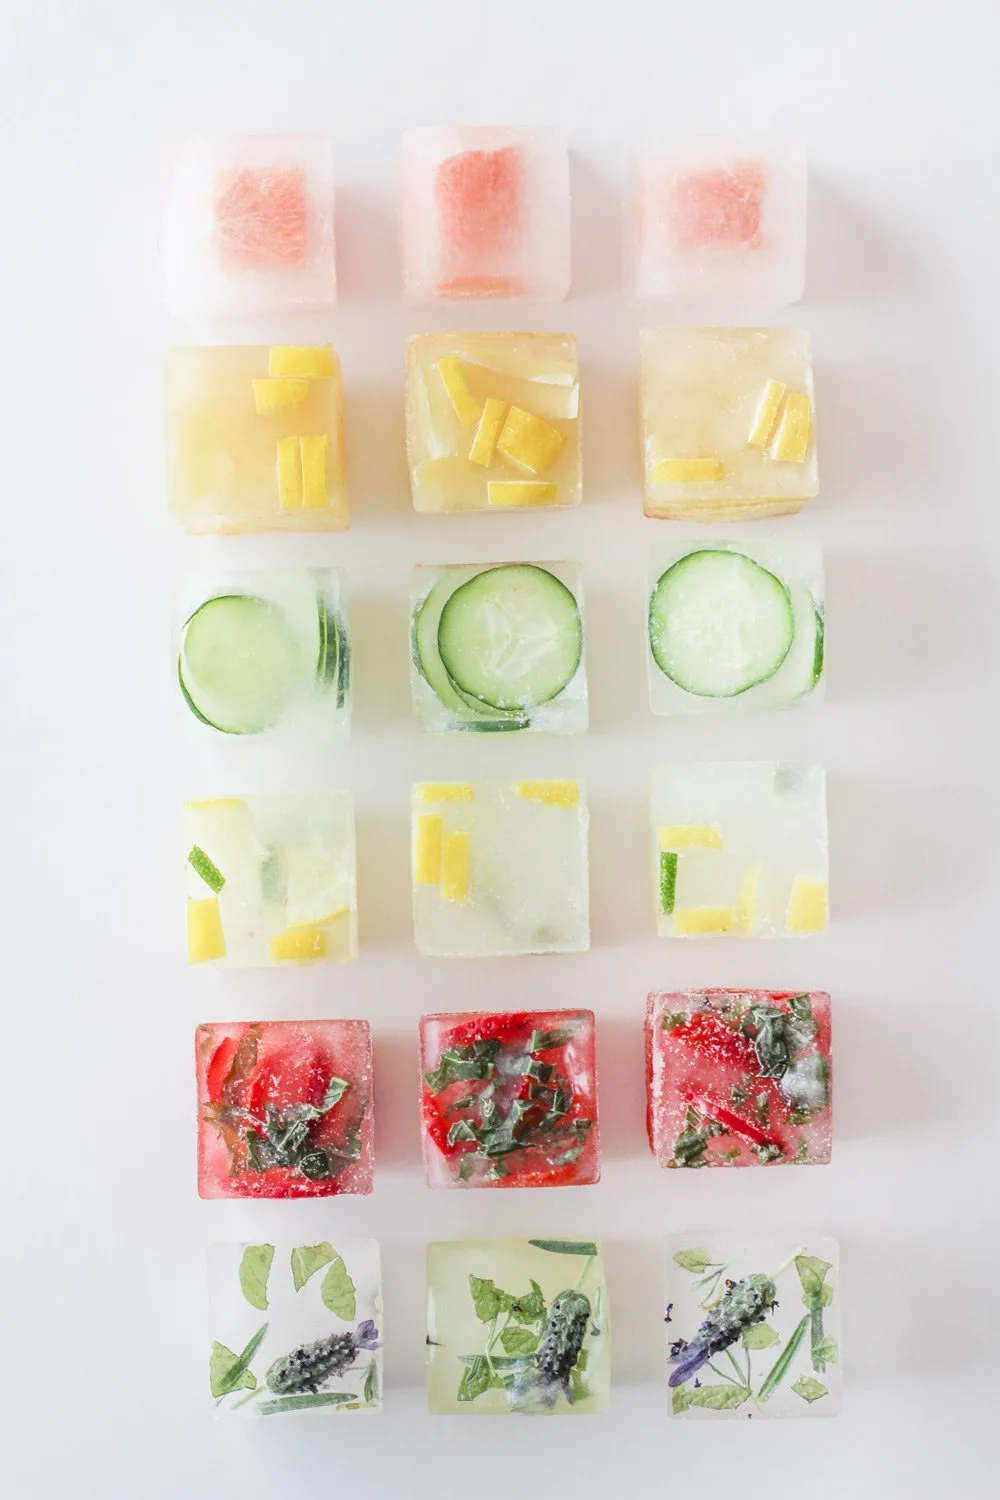 Flavored Ice Cubes | Summer entertaining, summer party ideas and more from @cydconverse